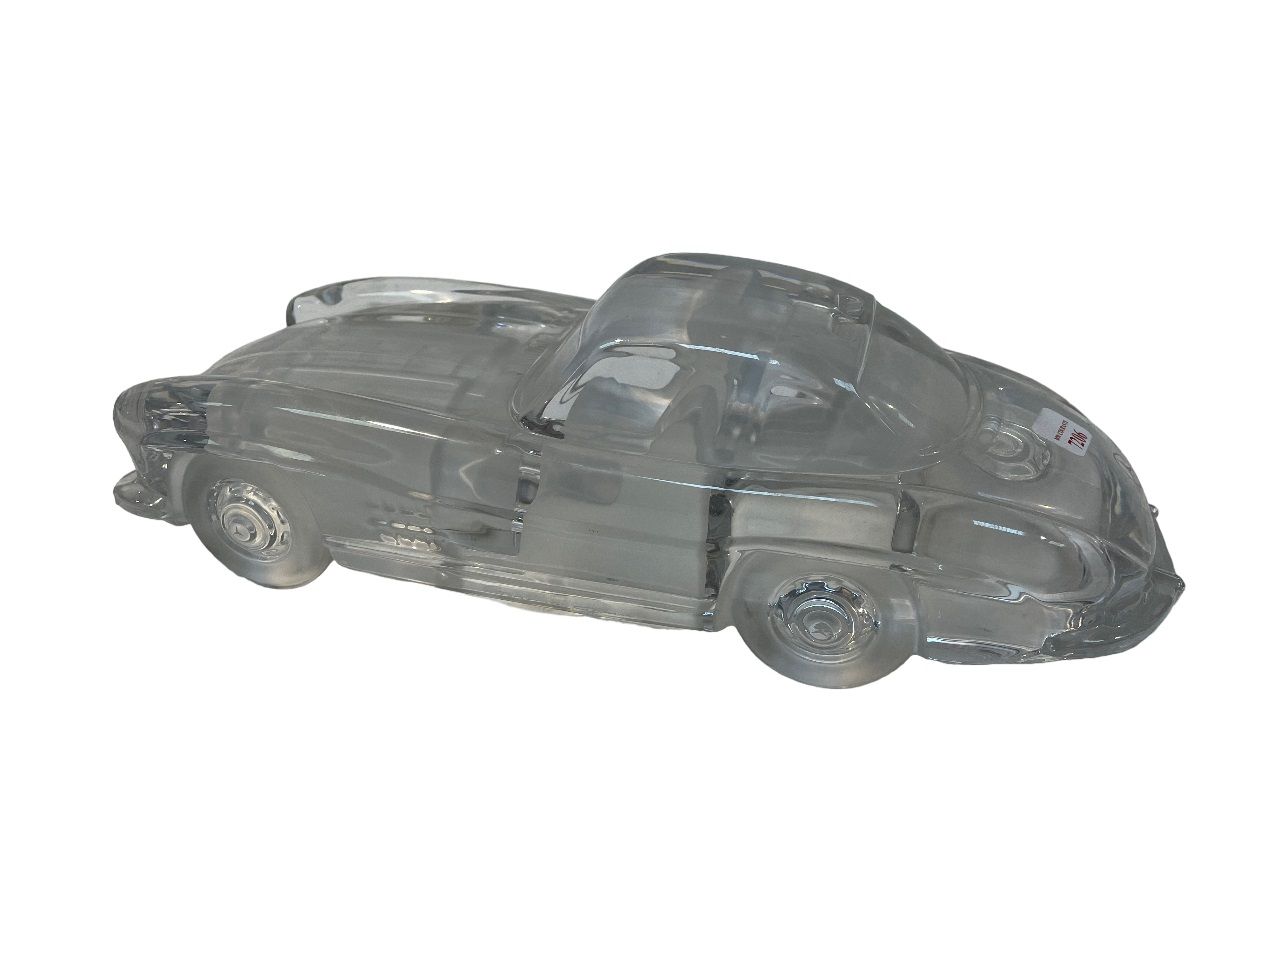 Null DAUM France, model of a MERCEDES in molded crystal.
10 x 33 x 14 cm